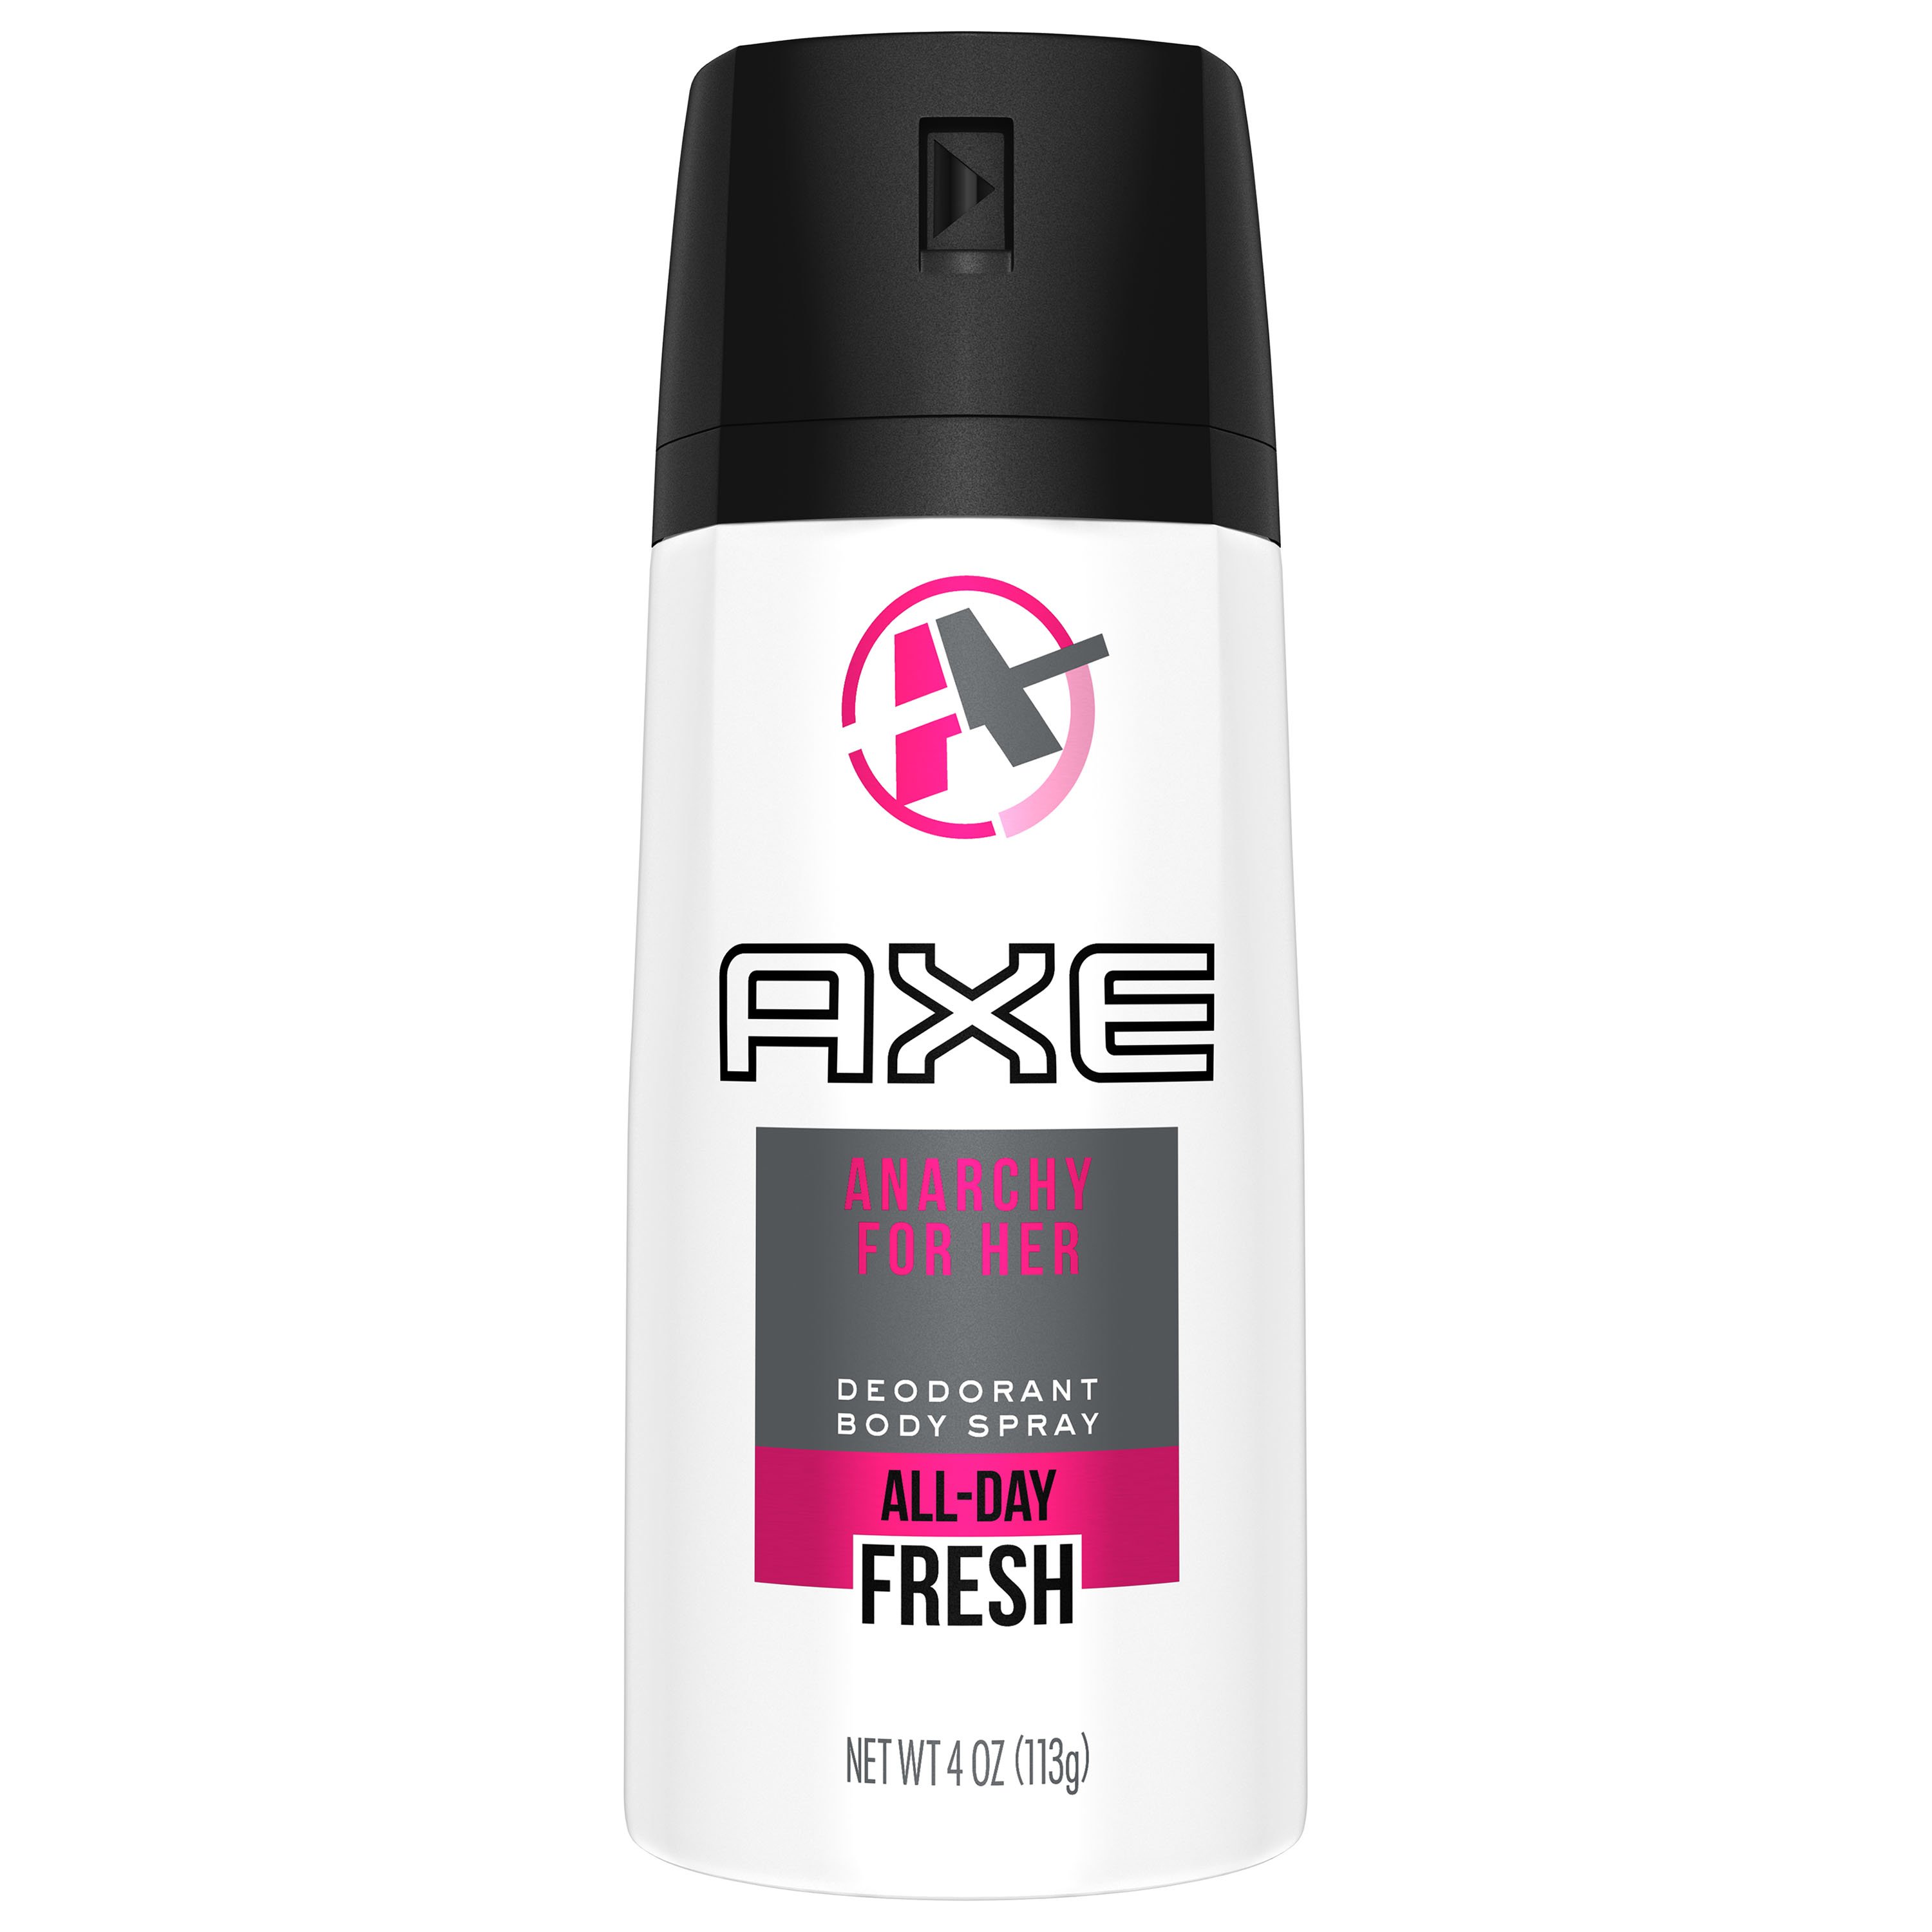 AXE Anarchy for Her Body Spray for Women - Shop Deodorant